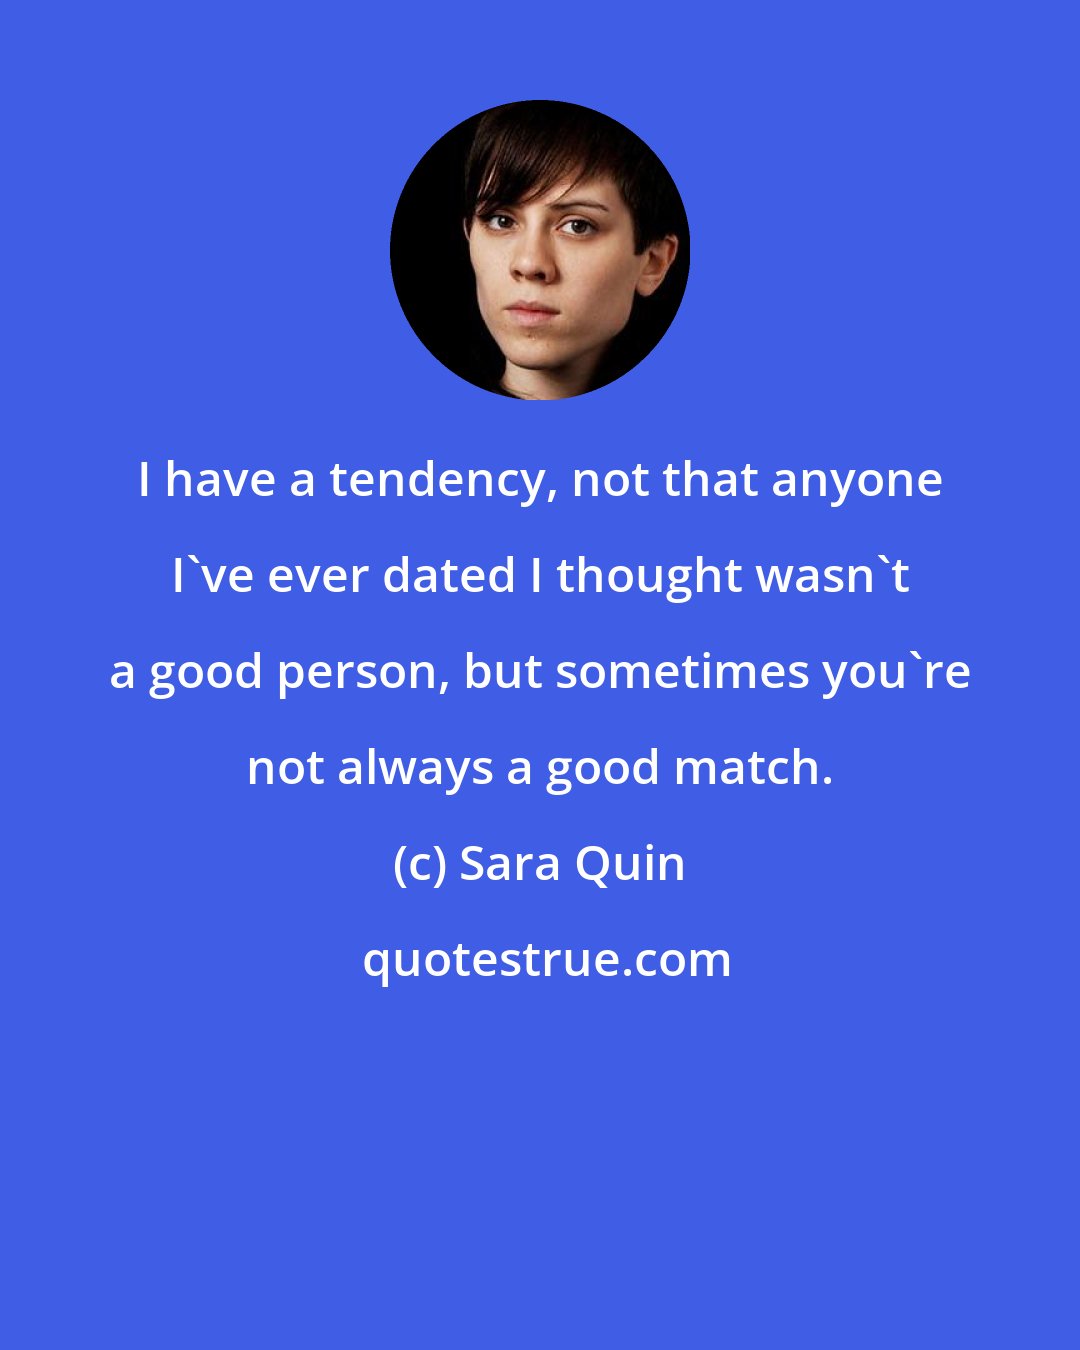 Sara Quin: I have a tendency, not that anyone I've ever dated I thought wasn't a good person, but sometimes you're not always a good match.